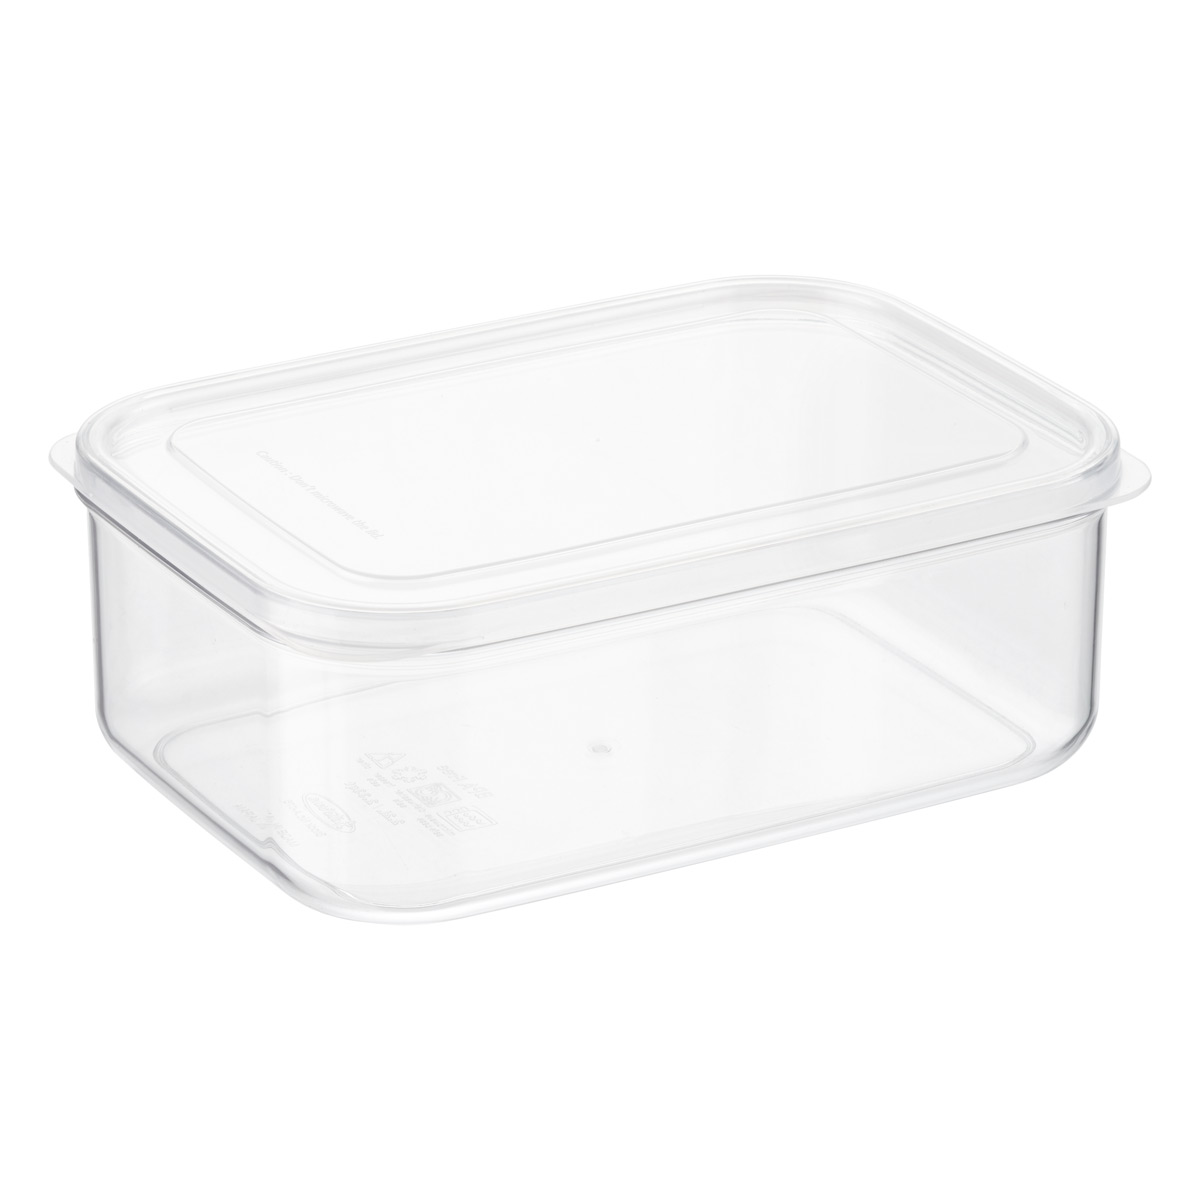 The Container Store 2.3 Quart 2.2L Rectangular Food Storage - Crystal Clear - 8-5/8 x 6-1/8 x 3-1/4 - Each